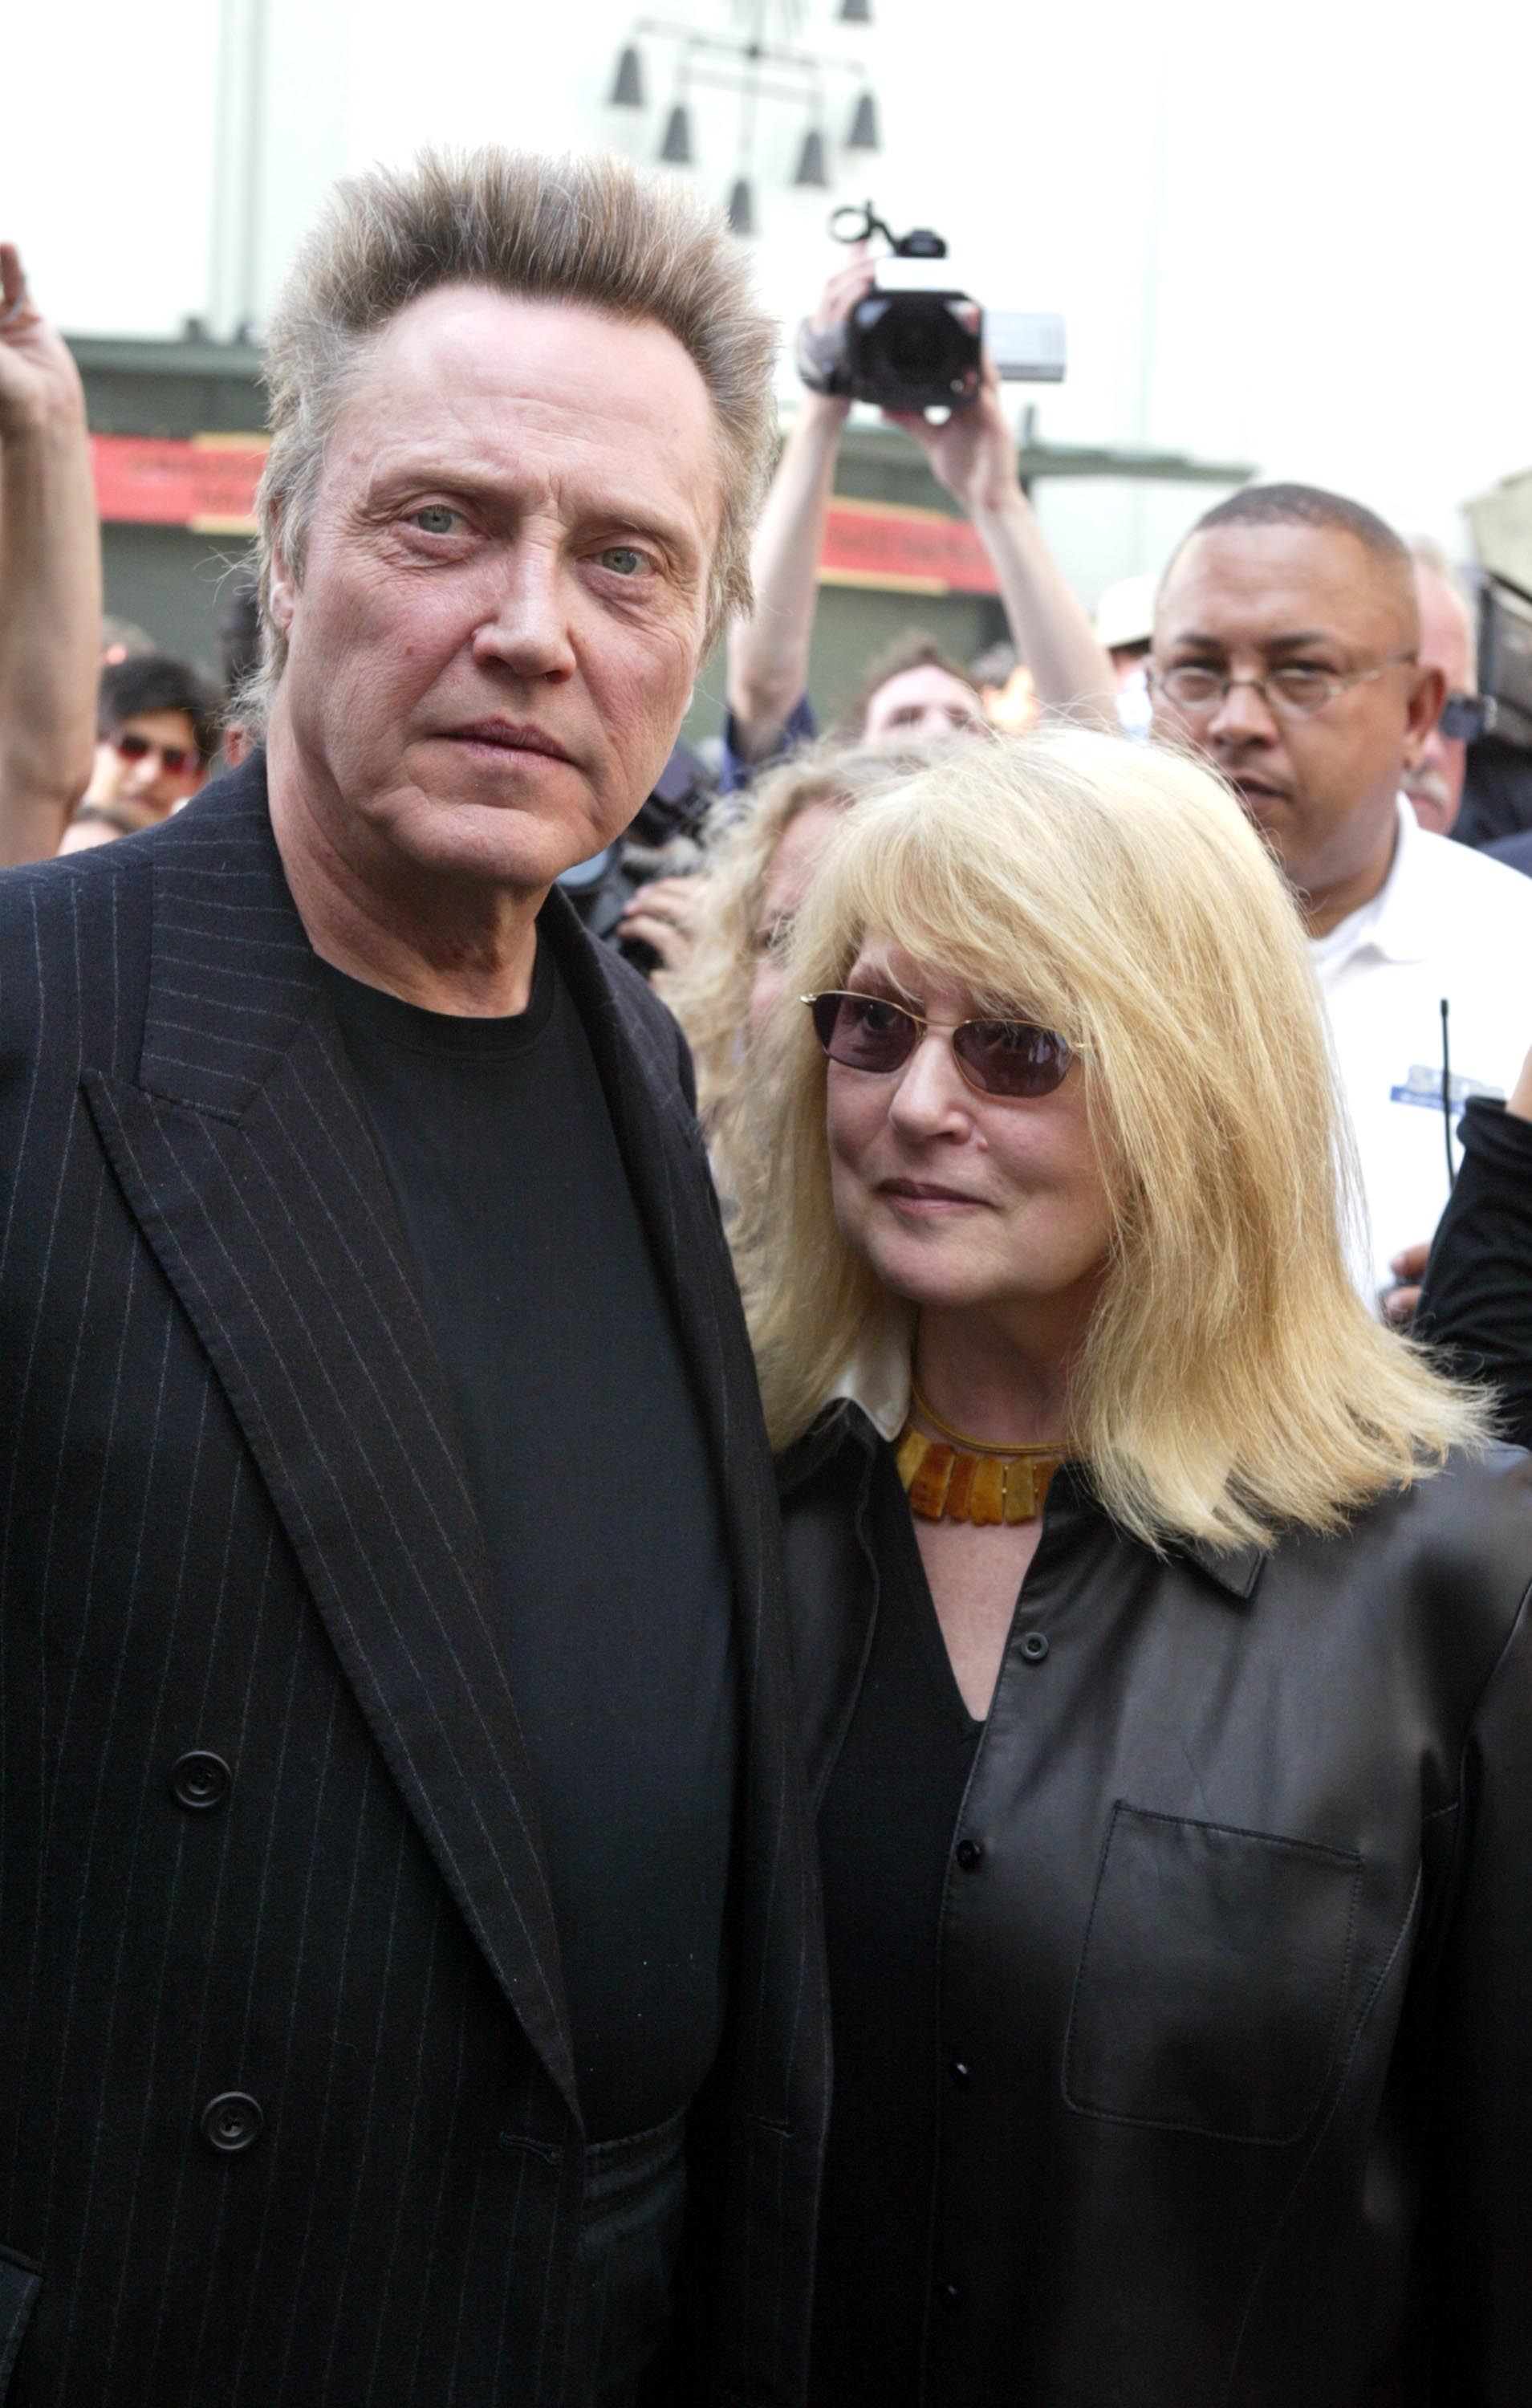 Actor Christopher Walken and wife Georgianne Walken at the hand and footprints ceremony honoring Christopher Walken at the Grauman's Chinese Theatre on October 8, 2004 in Hollywood, California. | Source: Getty Images